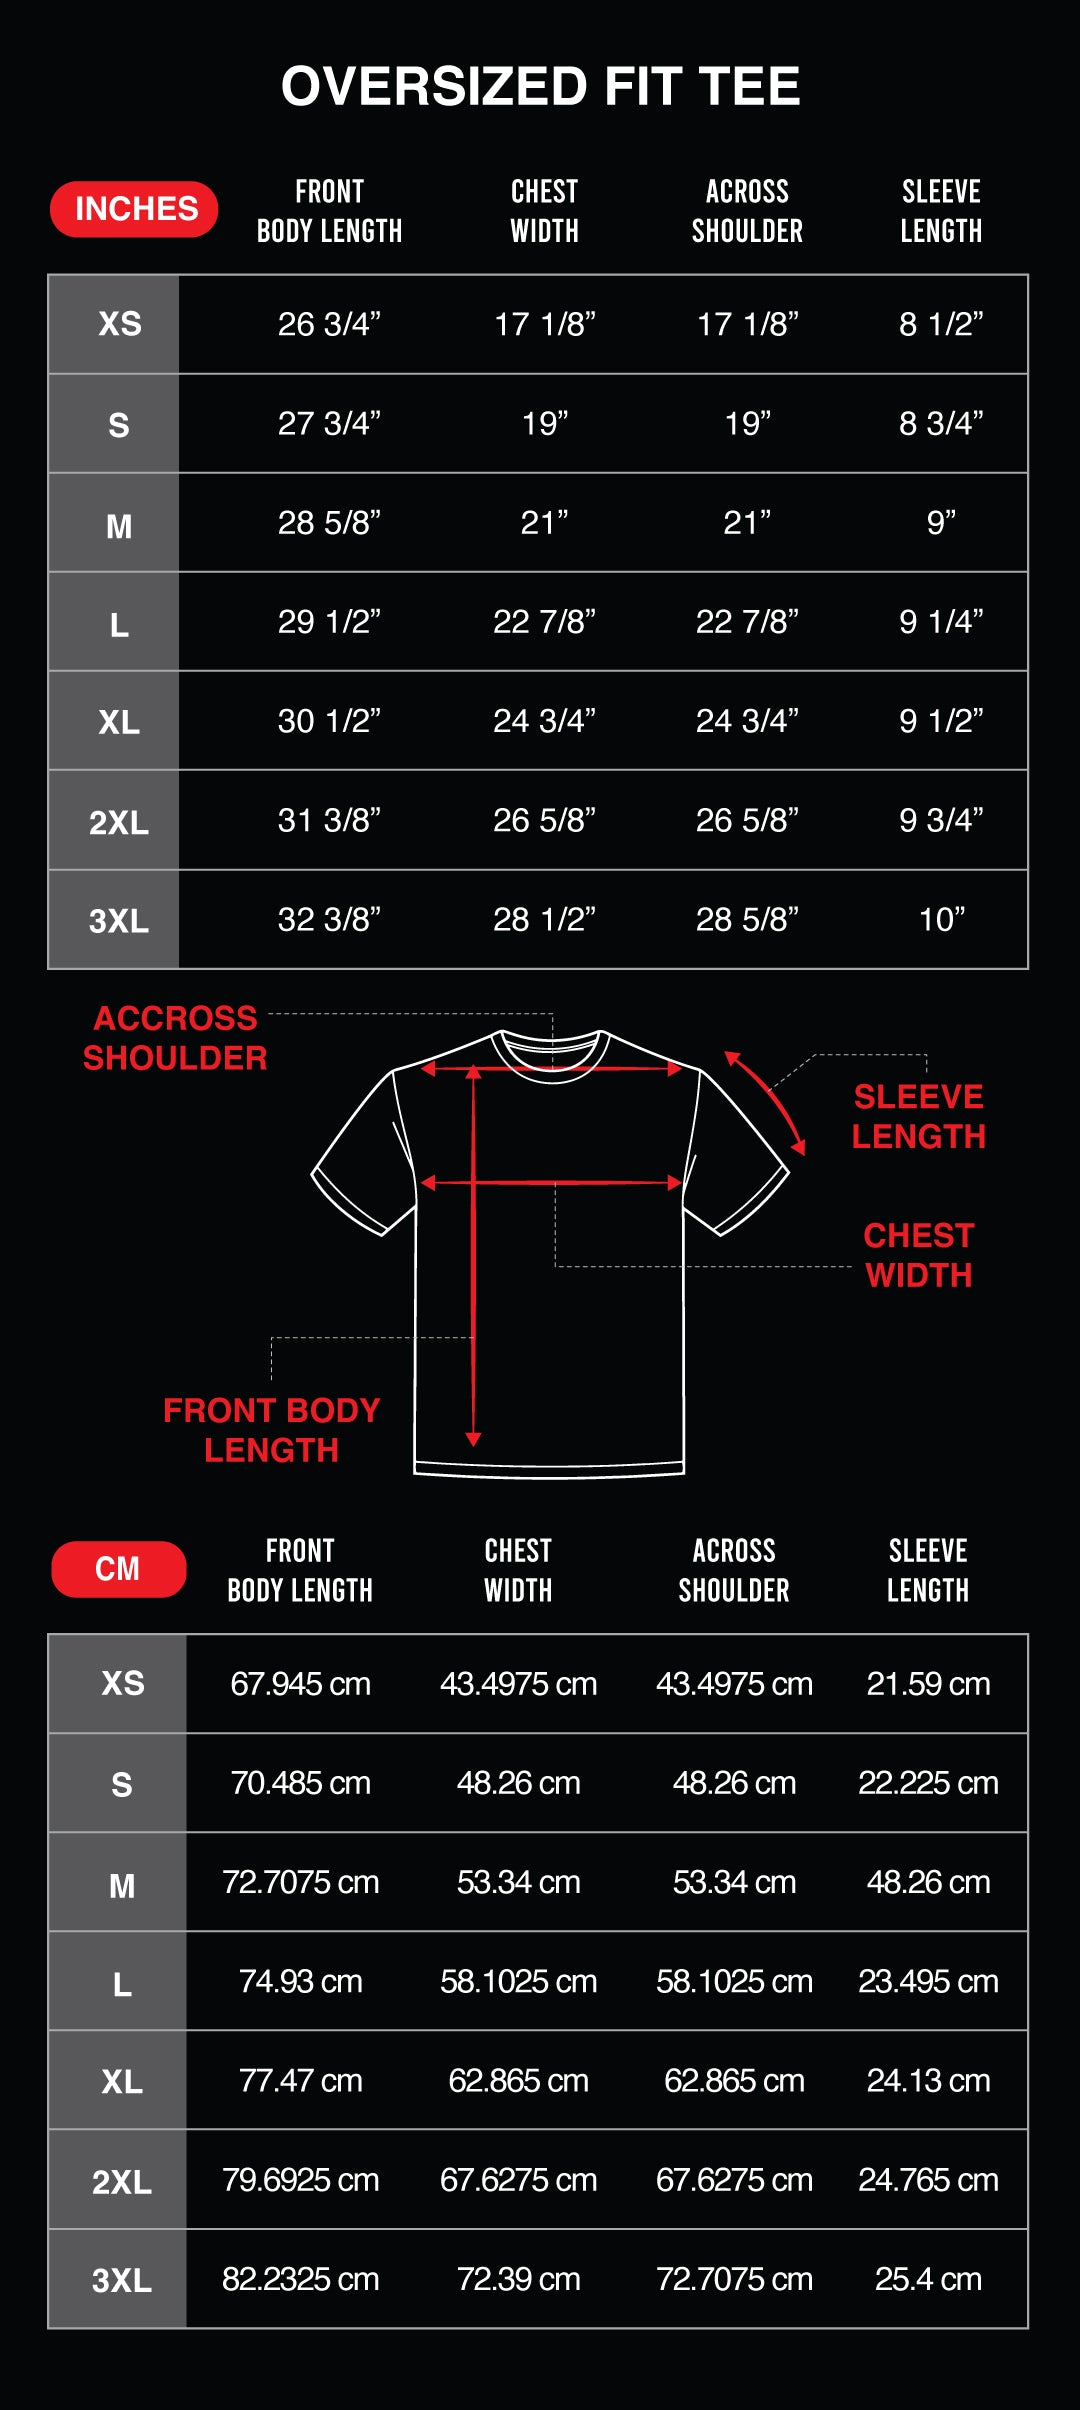 OVERSIZED FIT TEE SIZING GUIDE